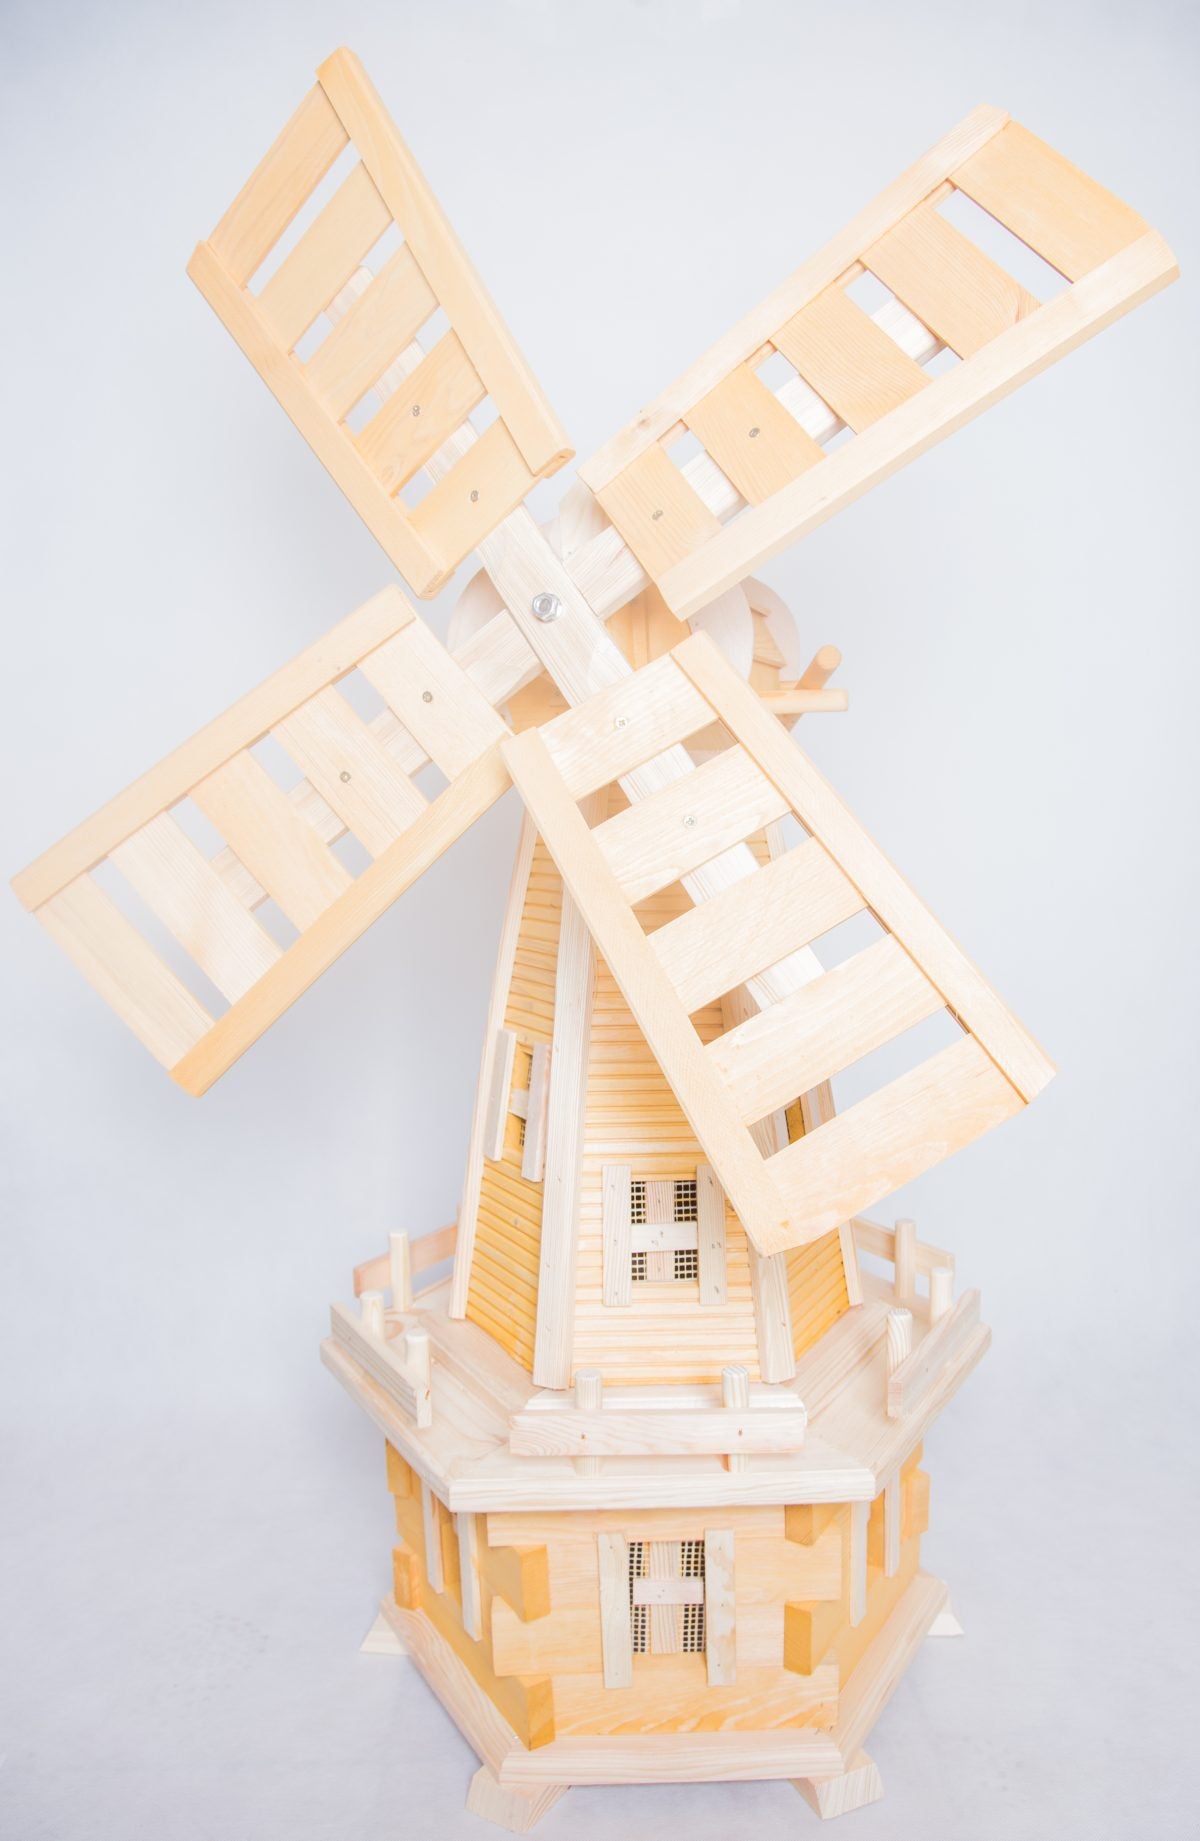 Handcrafted wooden windmills in various designs - charming garden decor with a touch of rustic elegance Pendle Windmills